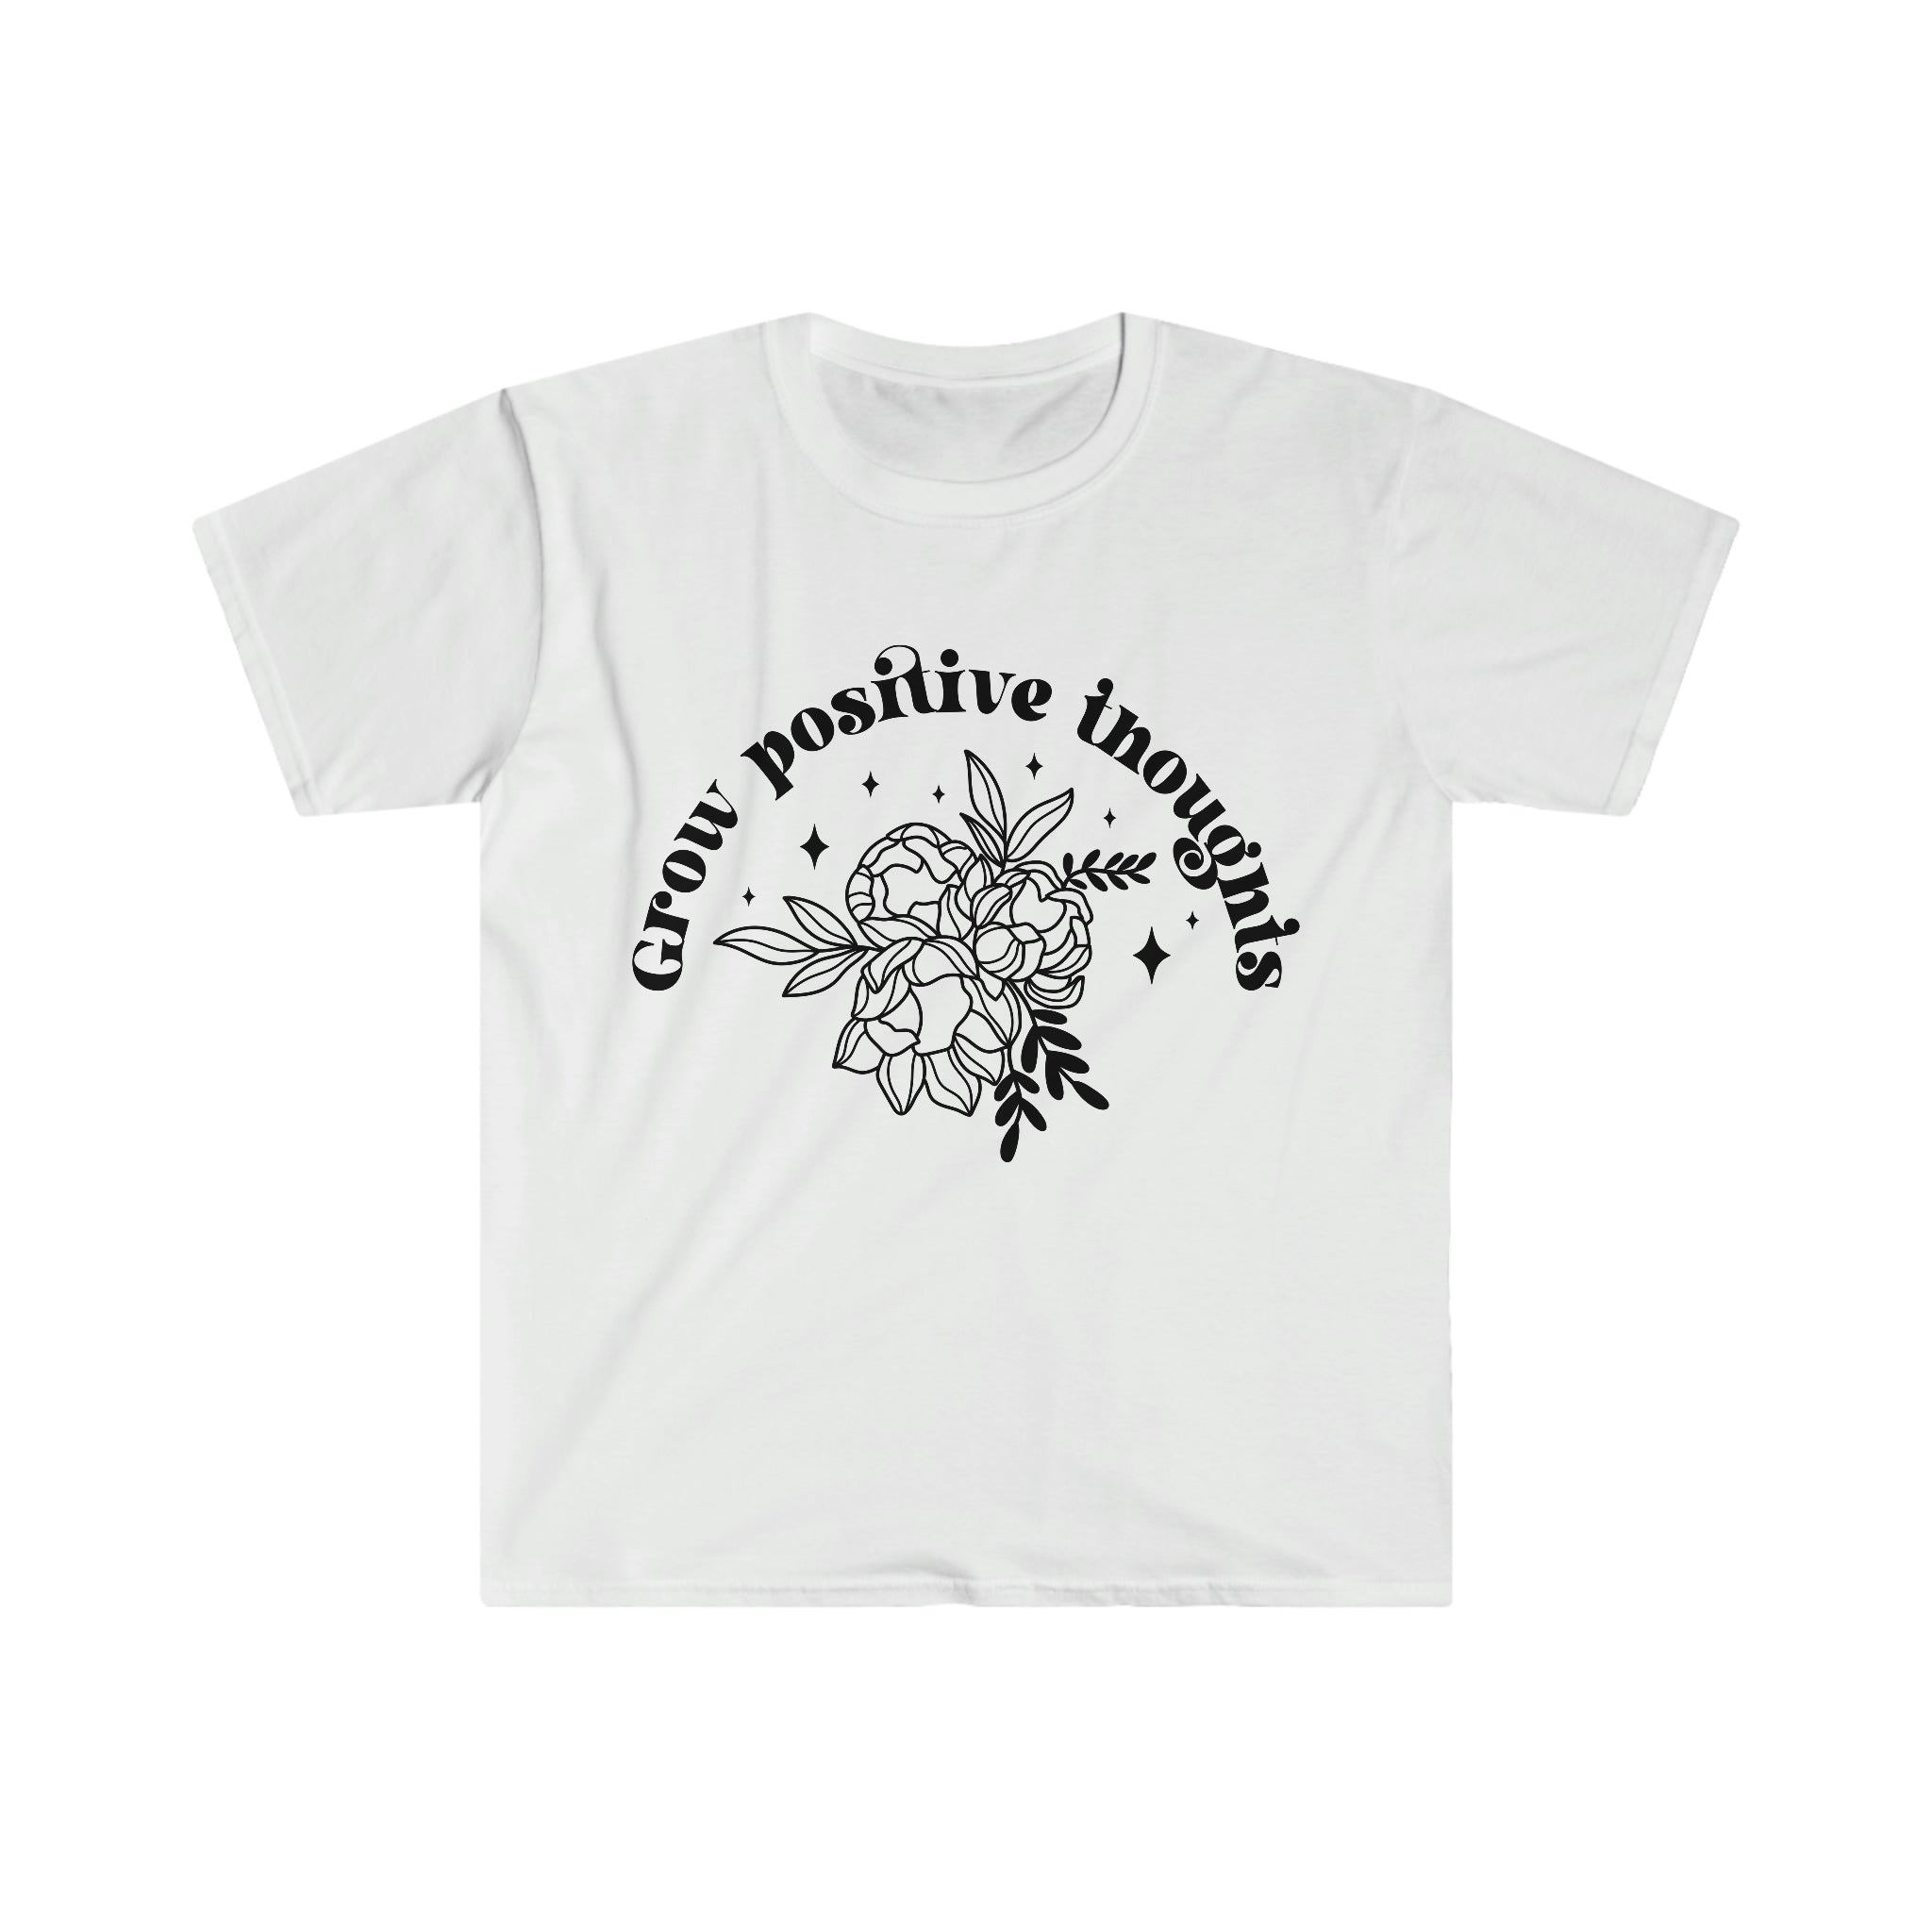 A Grow Positive Thoughts T-Shirt with black text displaying positive messages.